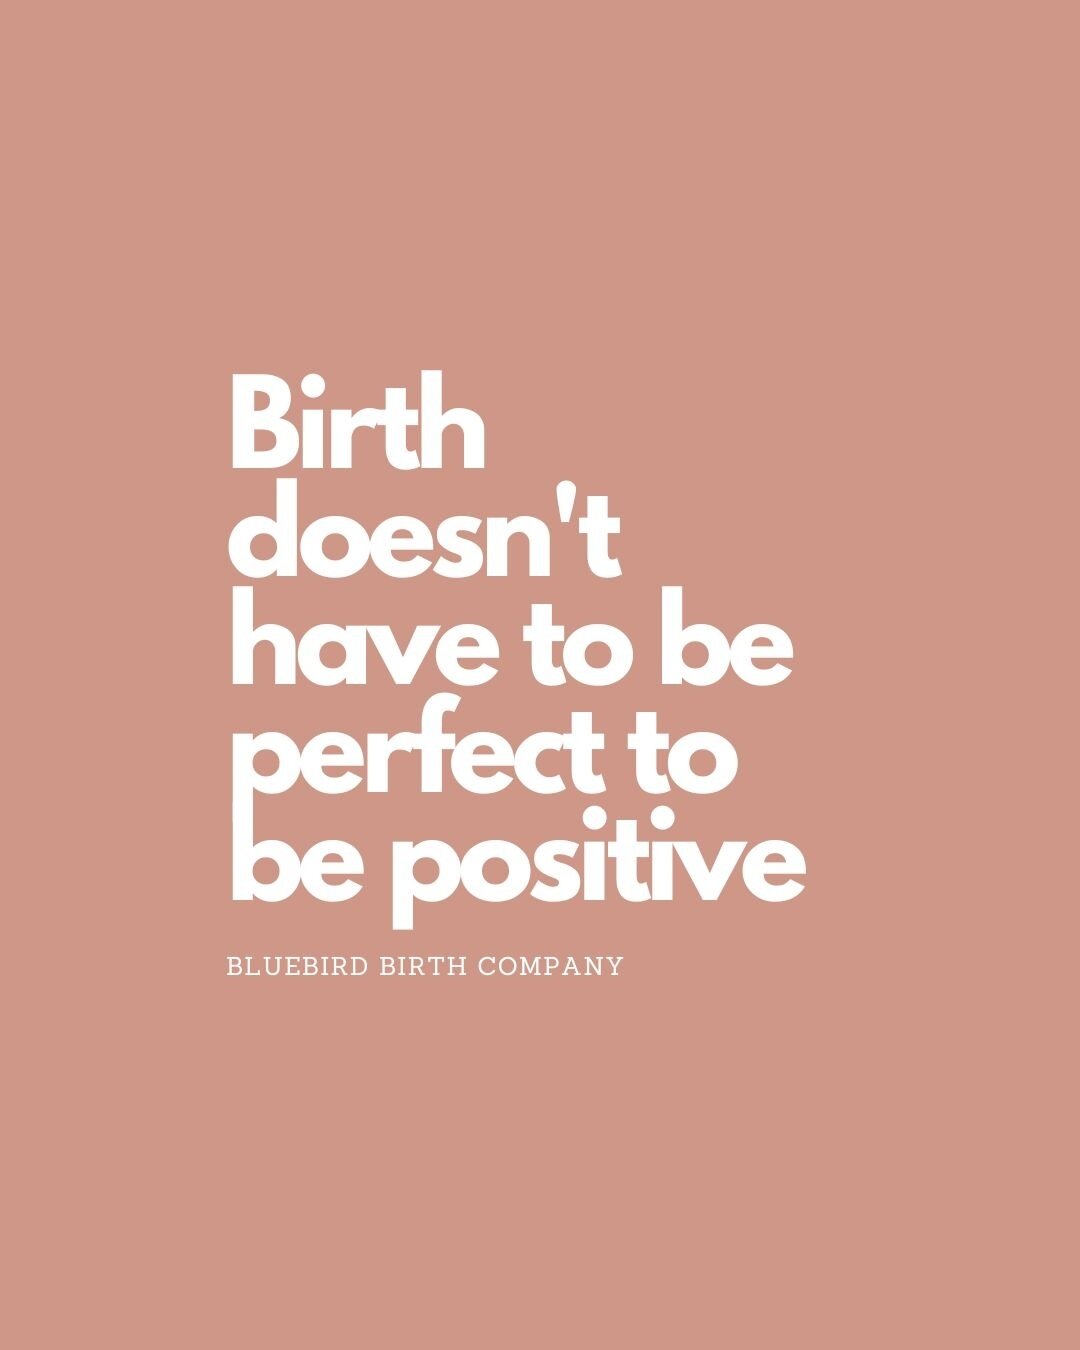 I always say in my courses that we&rsquo;re not preparing for a perfect or &lsquo;pain free&rsquo; birth, but a positive one!⁠
⁠
Even as a hypnobirthing teacher, neither of my births were your stereotypical &lsquo;hypnobirth&rsquo;. My first I ended 